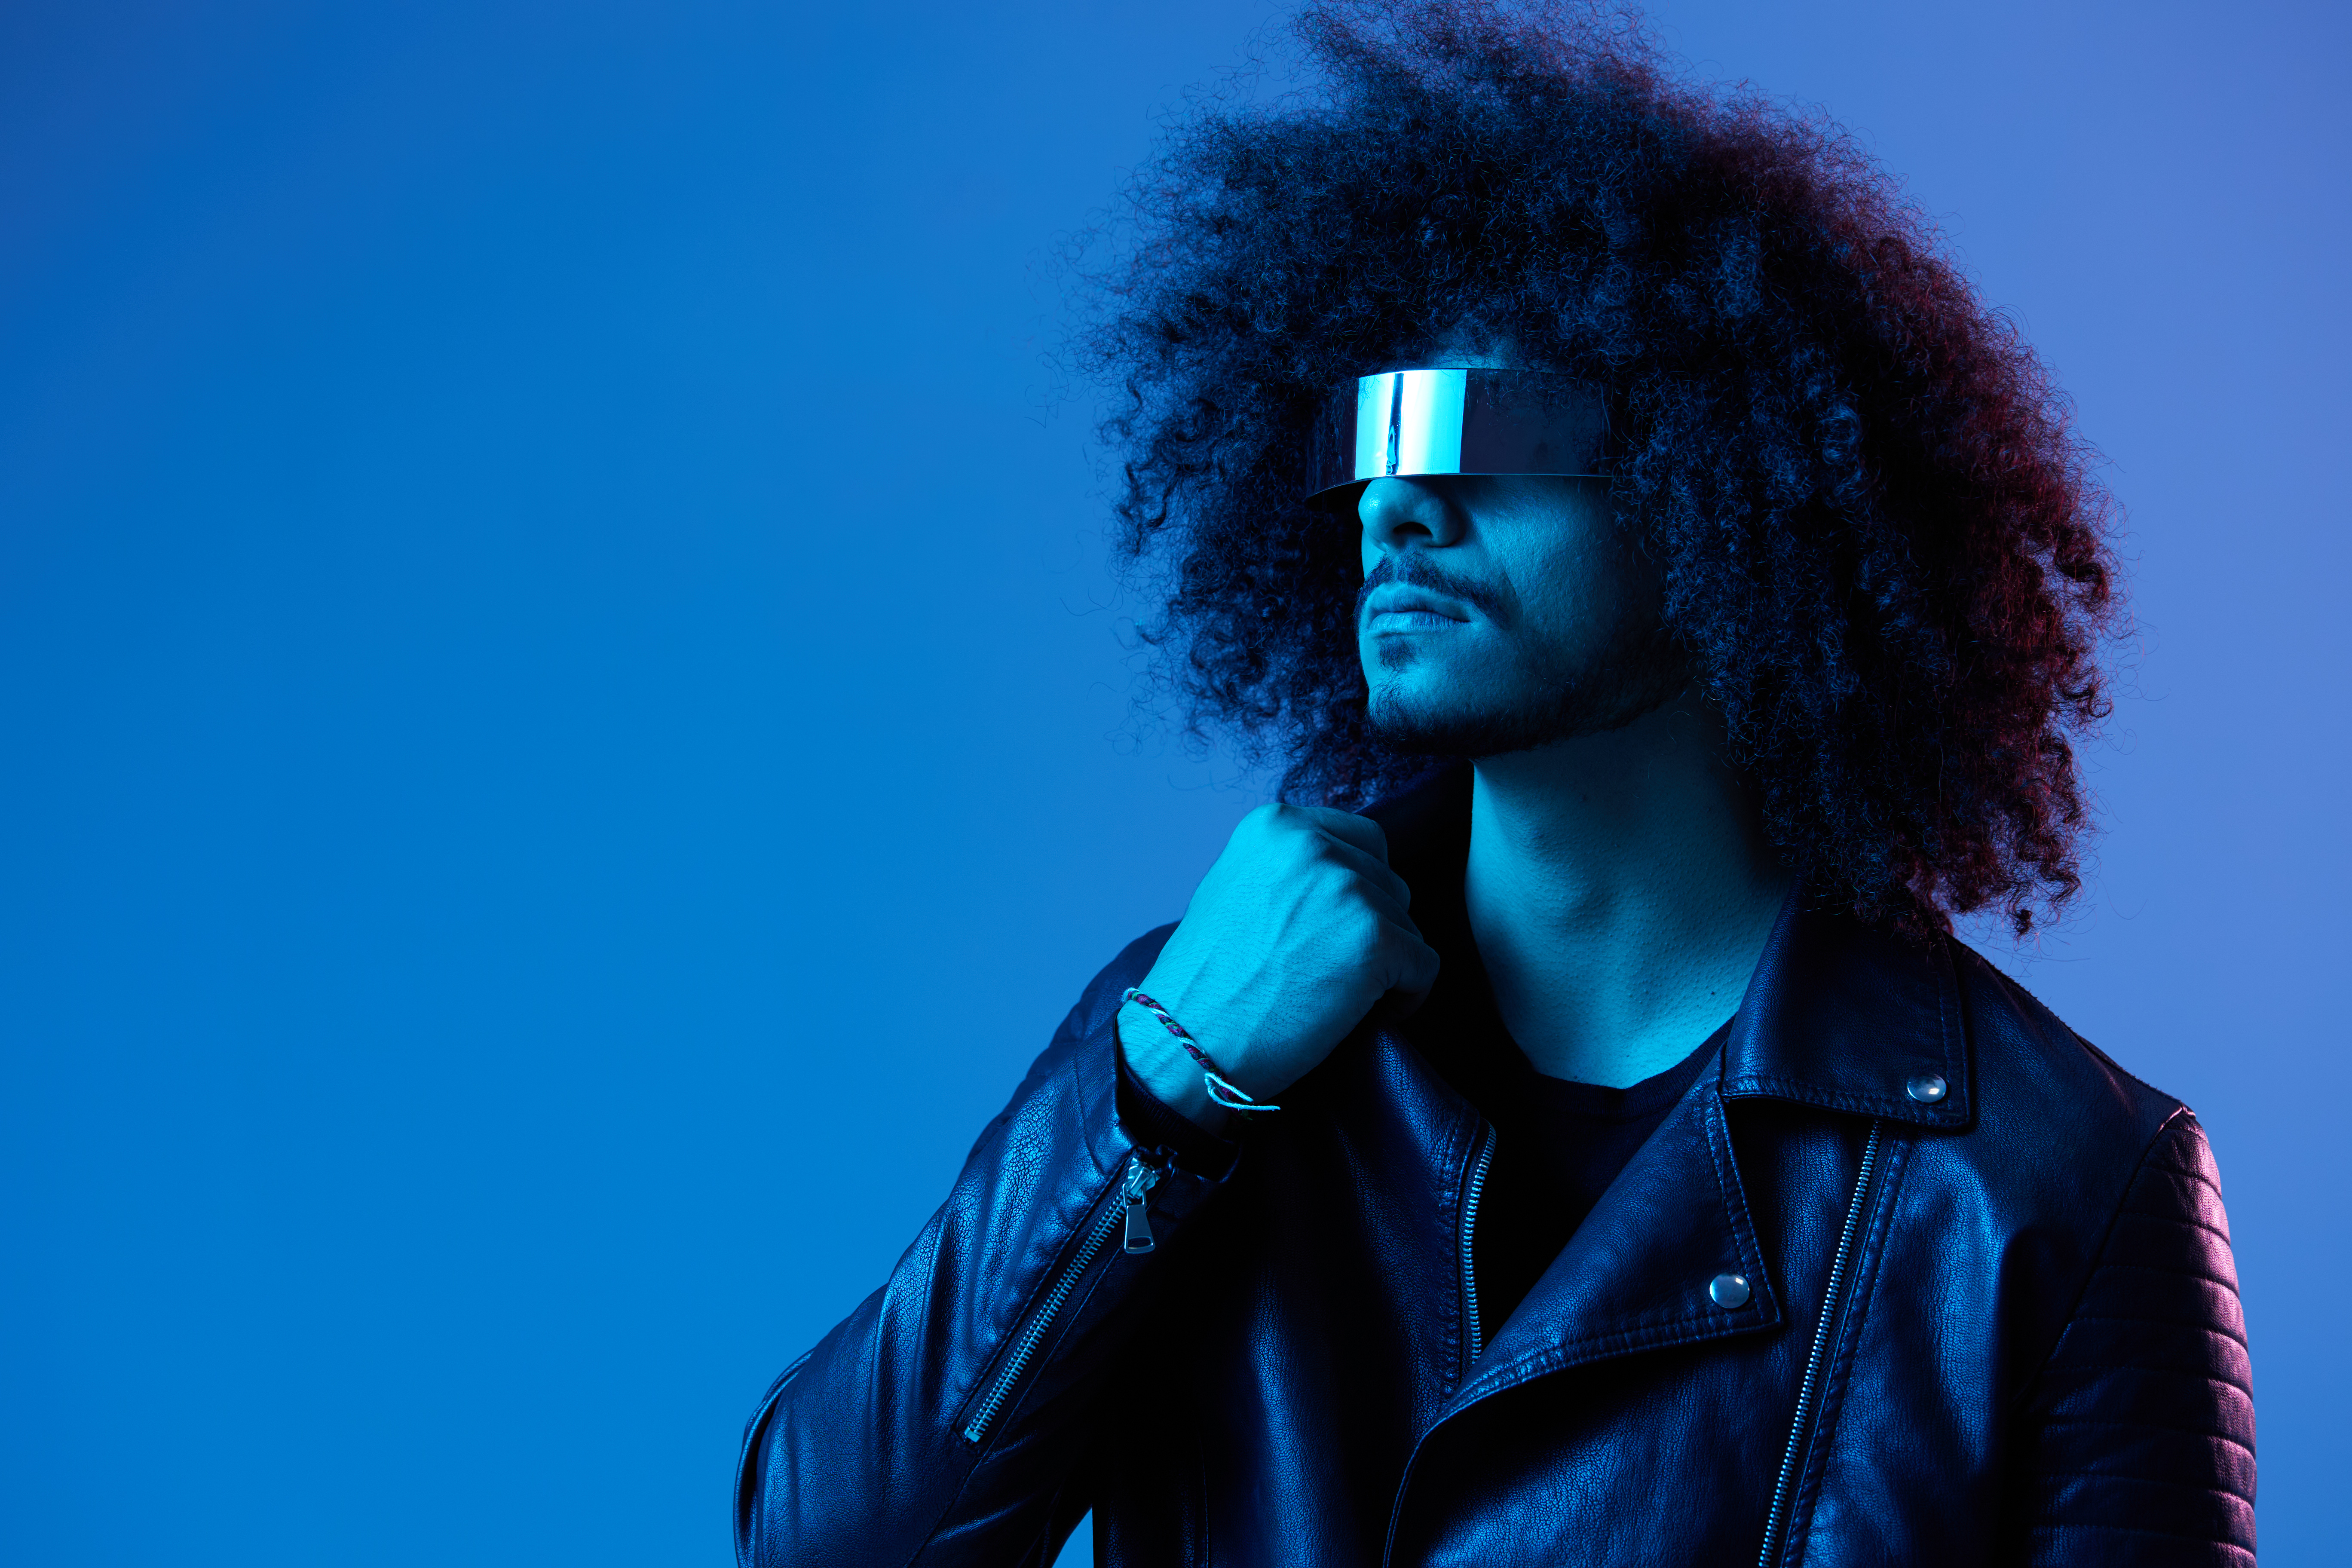 Portrait of fashion man with curly hair with stylish glasses on blue background multinational